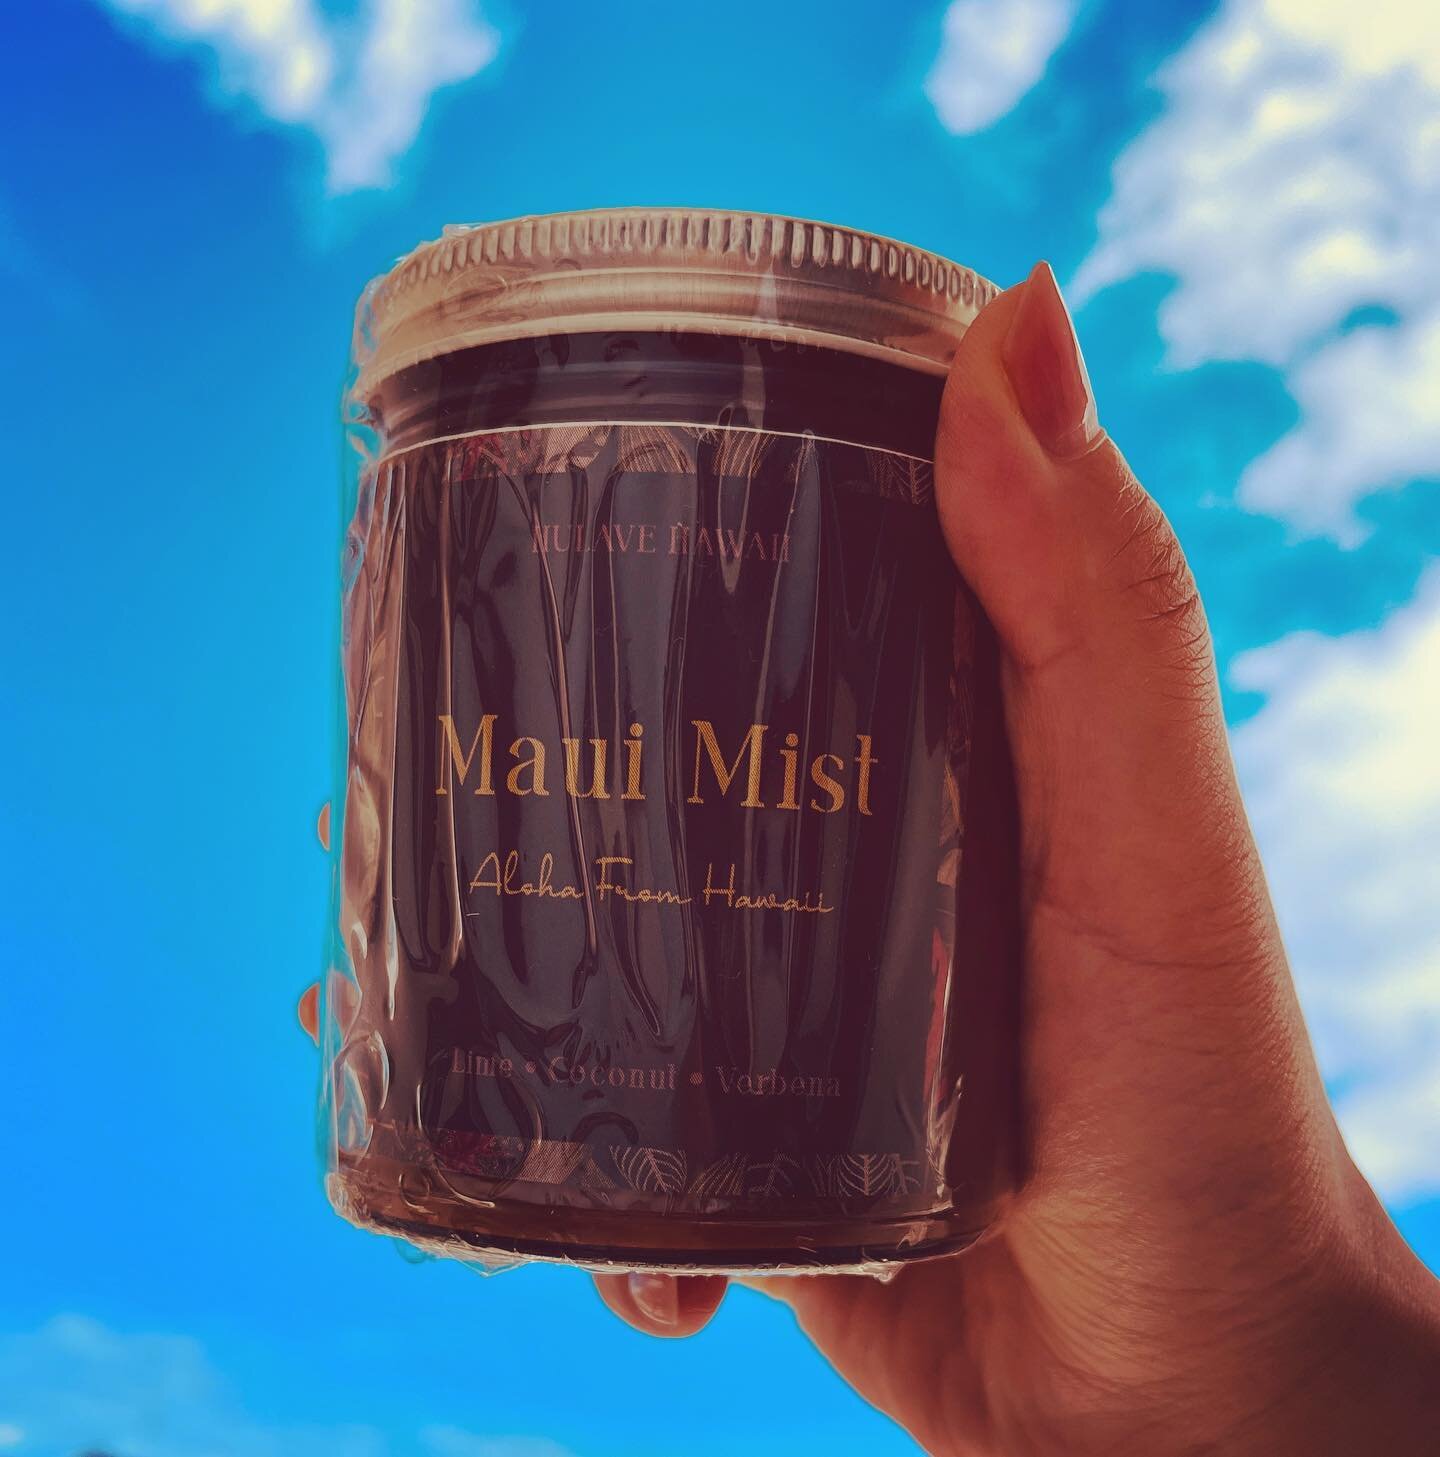 Embrace the captivating blend and let your senses embark on a blissful journey to the shores of Hawaii. 🌺🌴 #maui #mauimist #hulavehawaii #hulave #scentedcandles #soycandles #hawaiiancandles